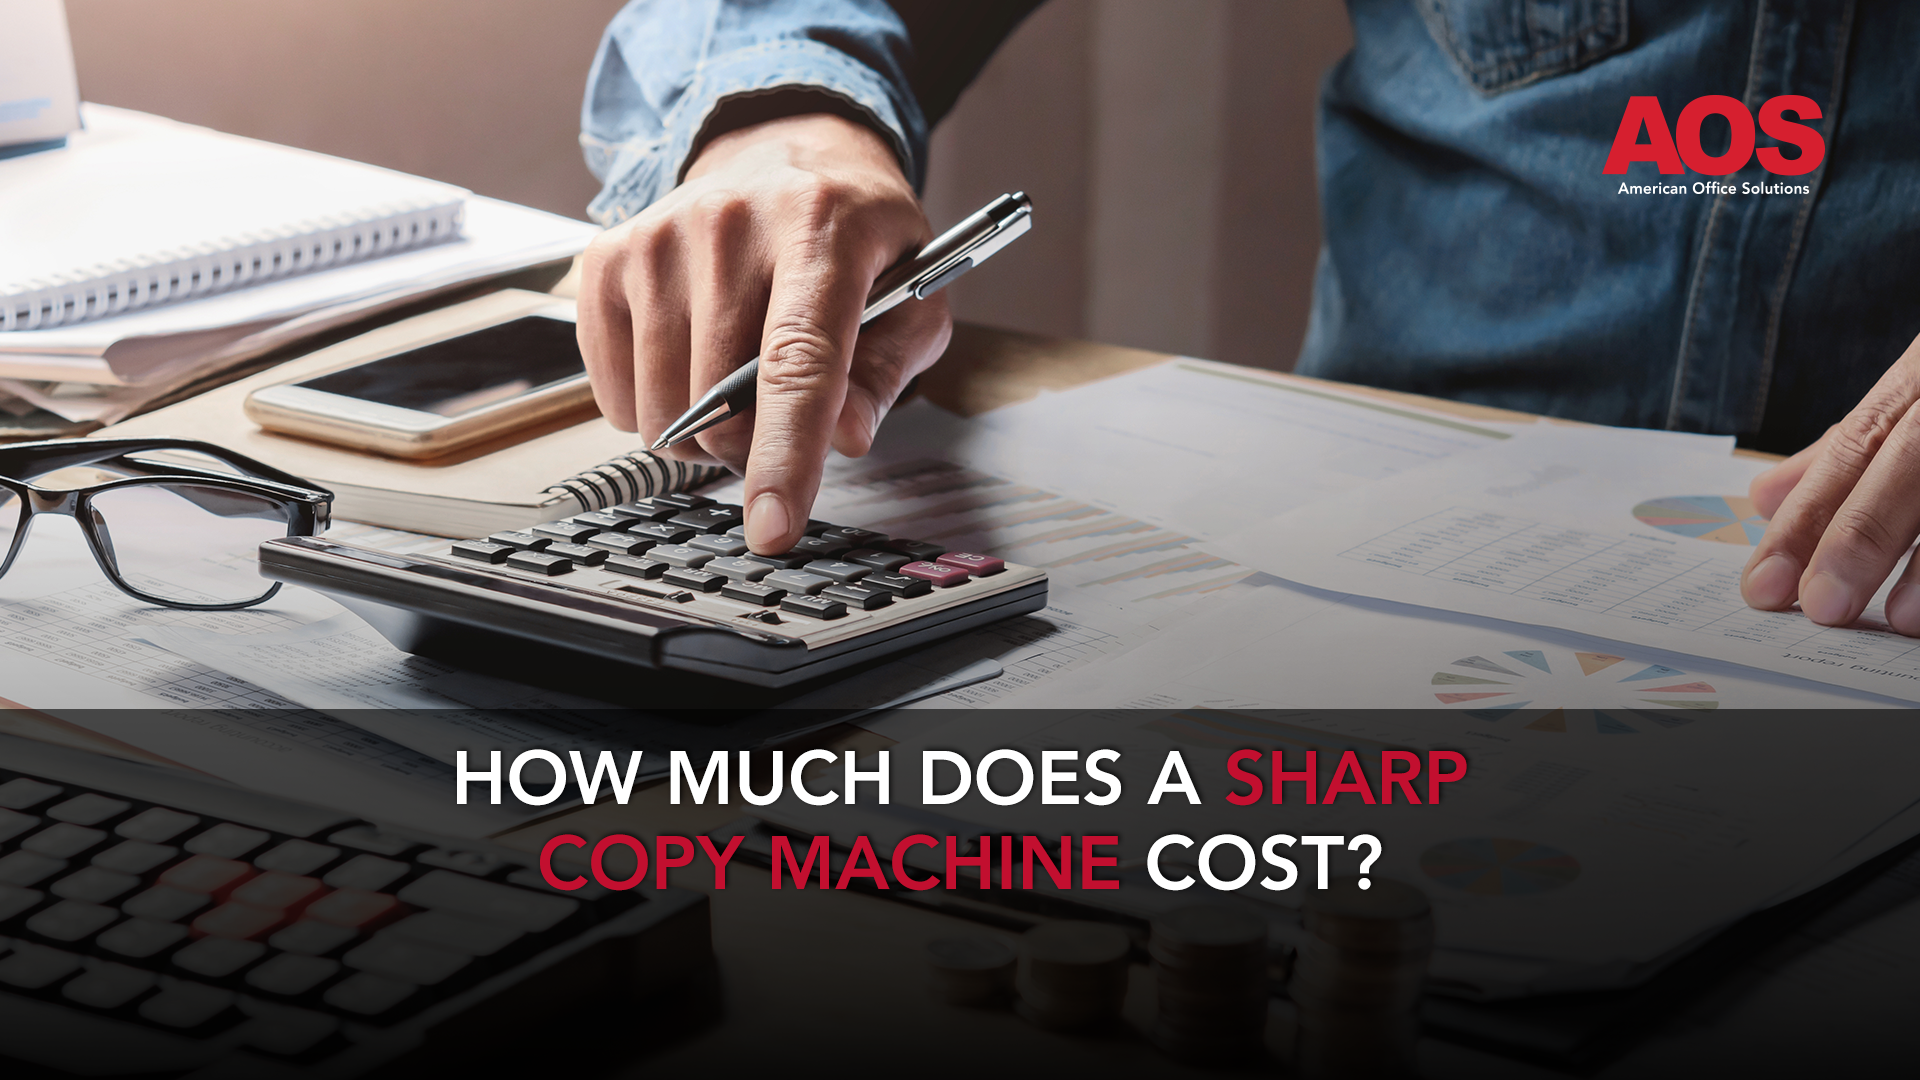 How Much Does a Sharp Copy Machine Cost?